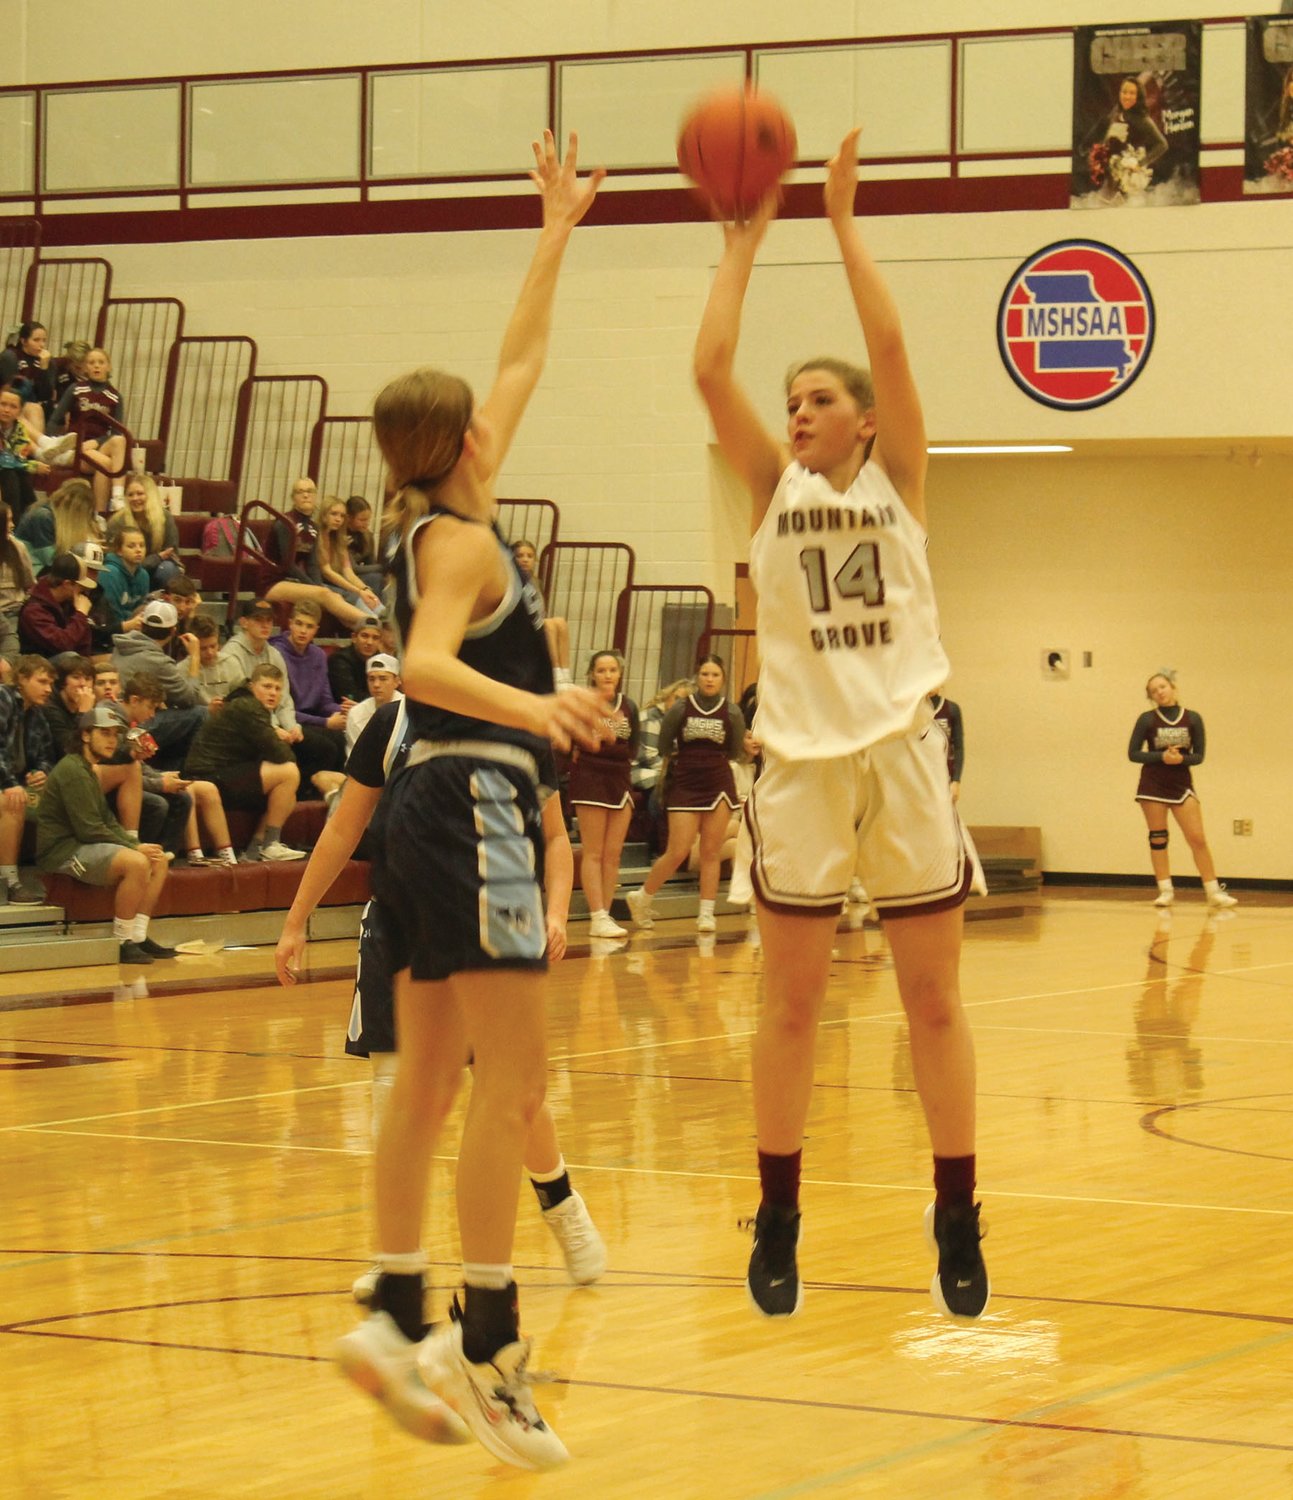 Mountain Grove’s Reagan Hoerning extends for a jump shot against the Salem Lady Tigers.